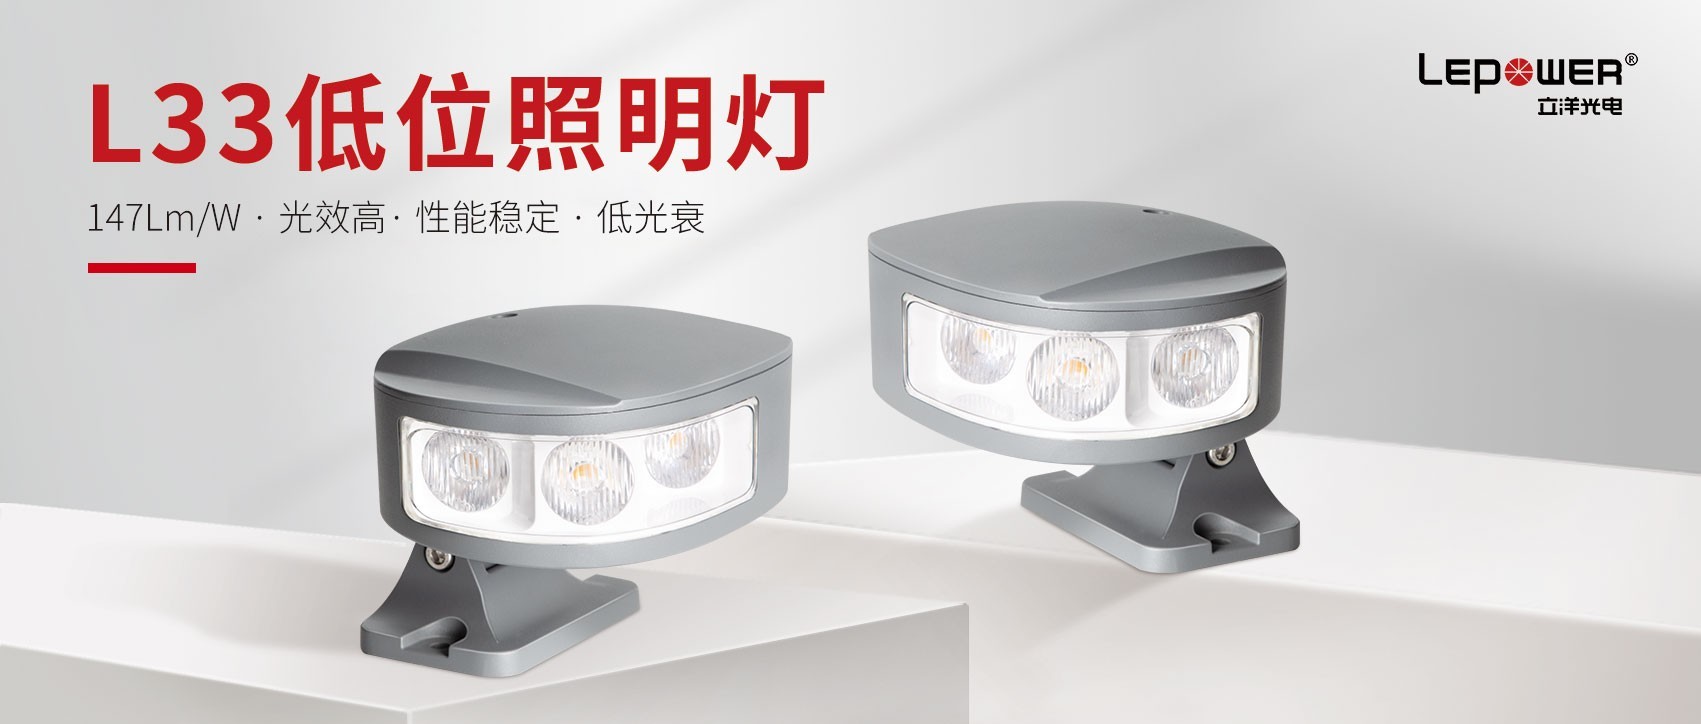 Lepower Optoelectronics LED low level lighting guardrail light L33 is the most groundbreaking innovative product!